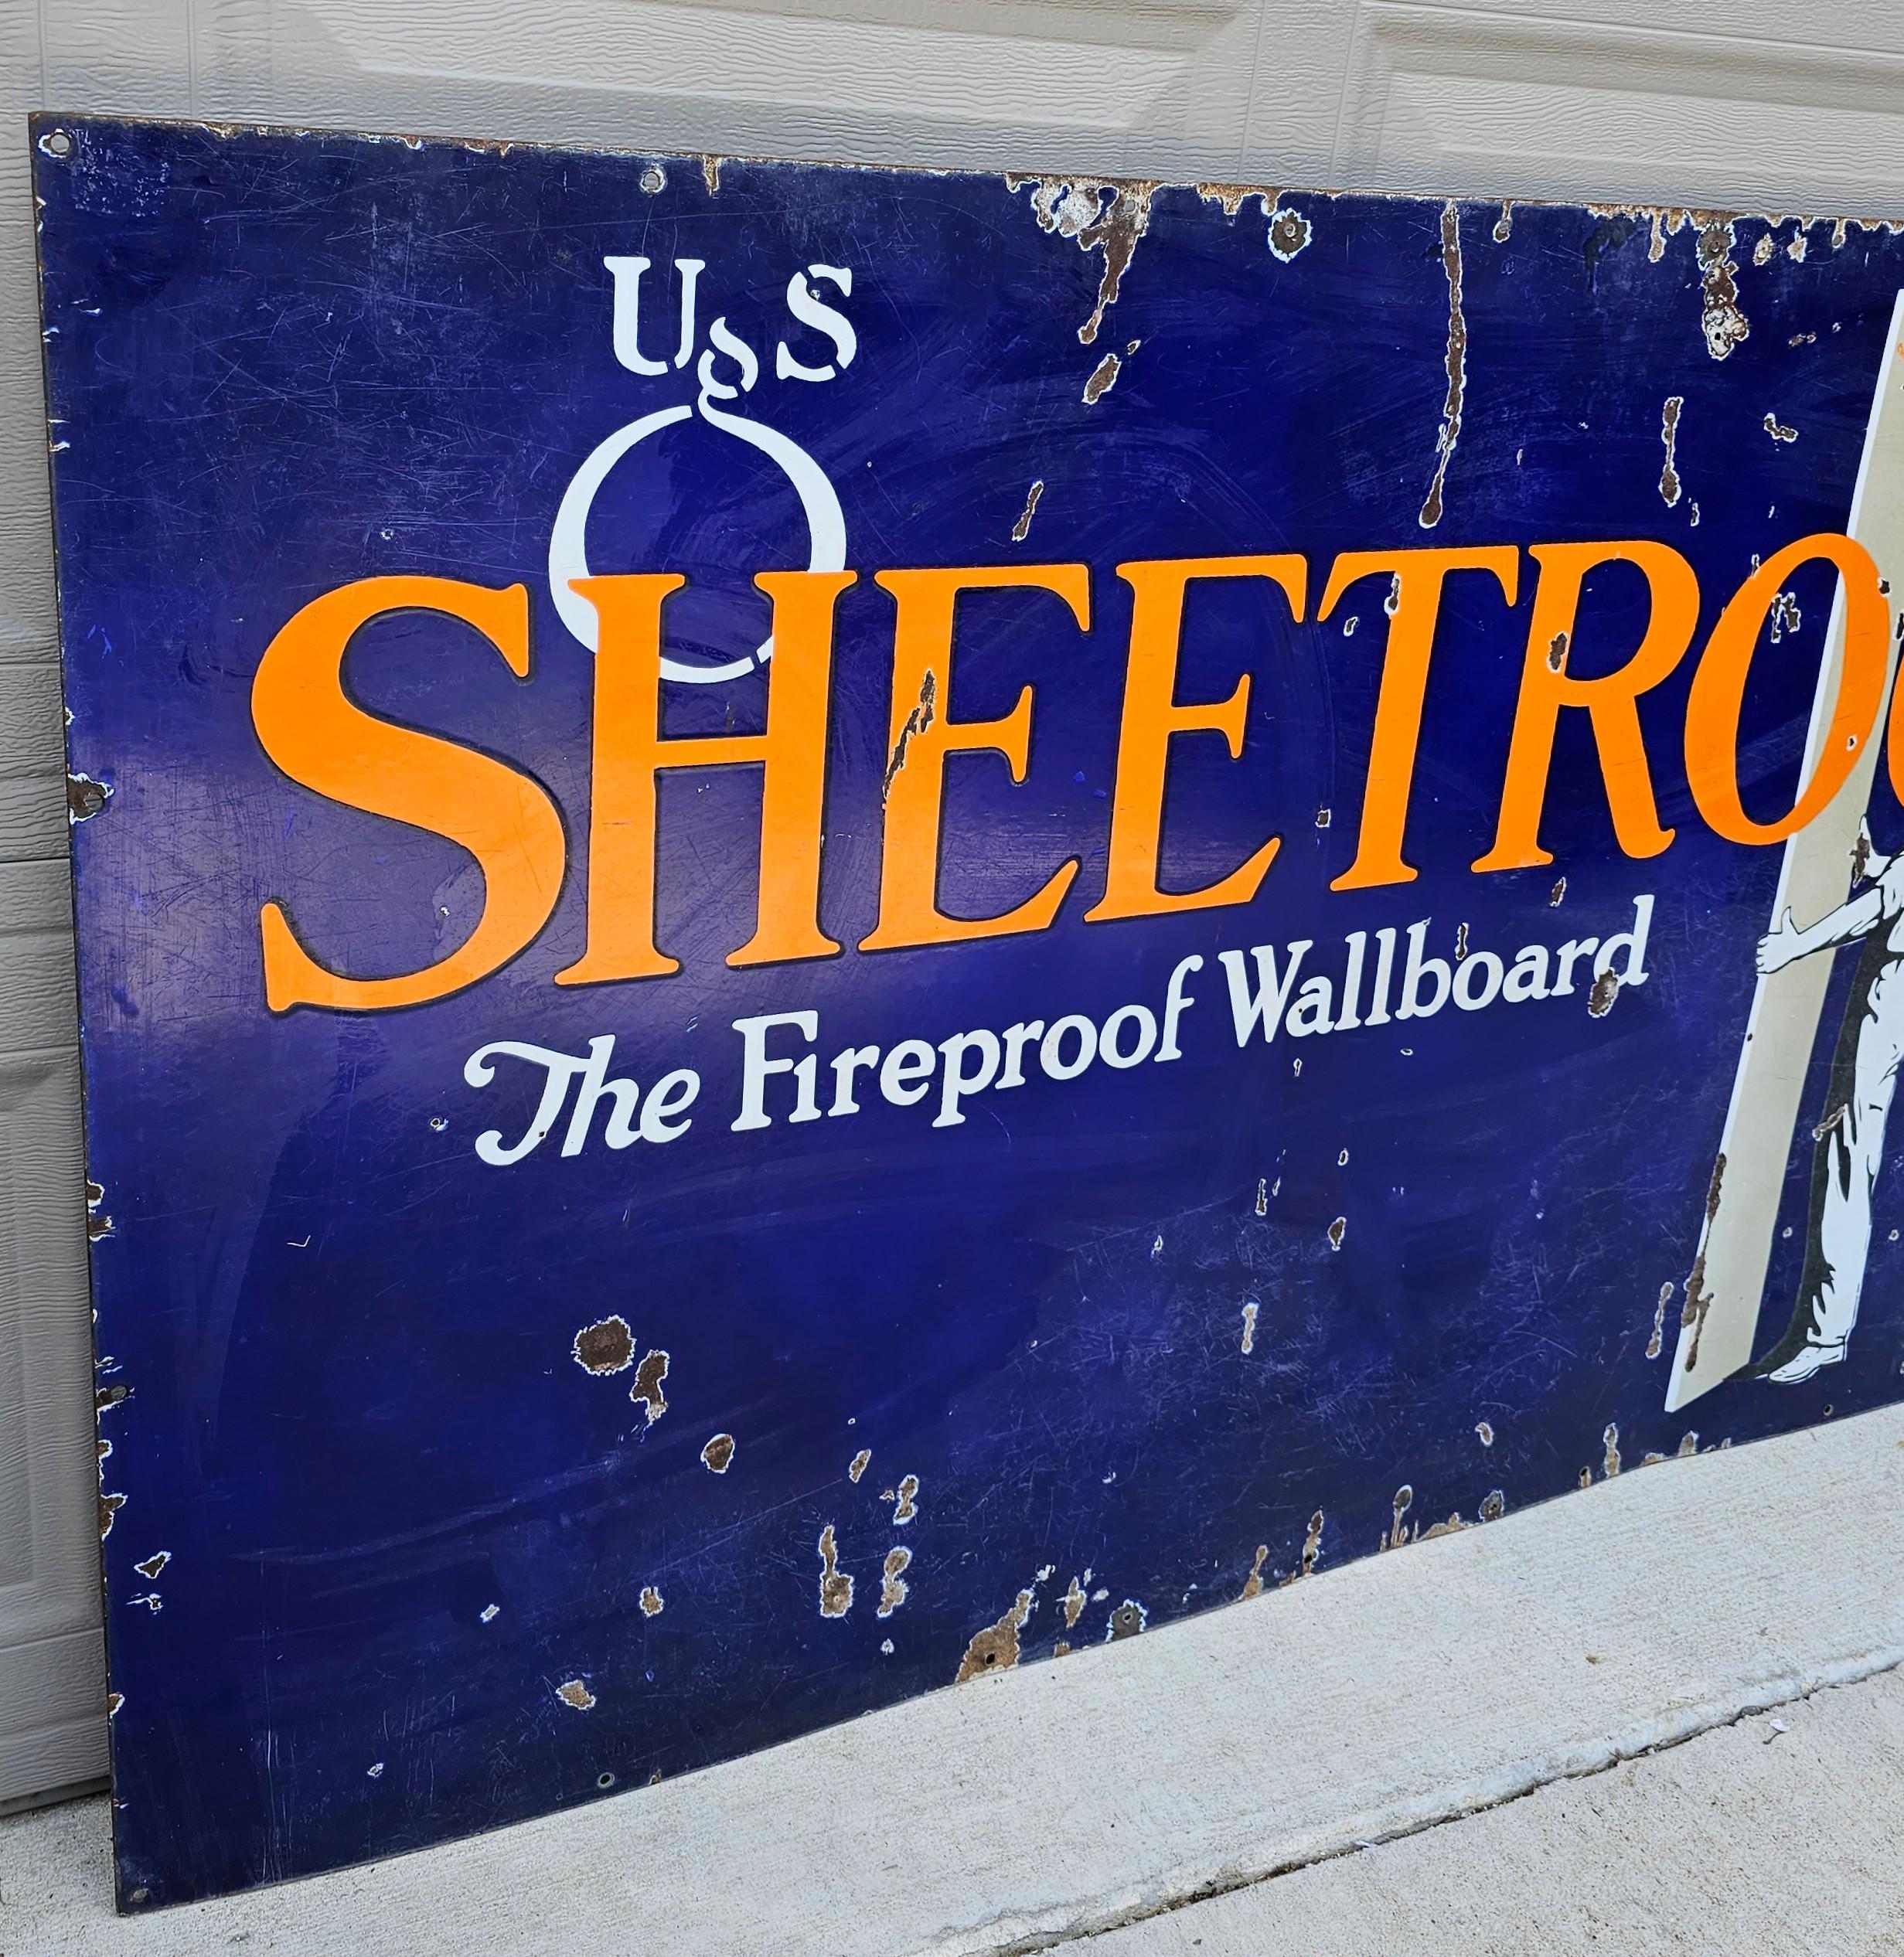 Industrial Large Early 20th Century American Usg Sheetrock Advertising Porcelain Sign For Sale